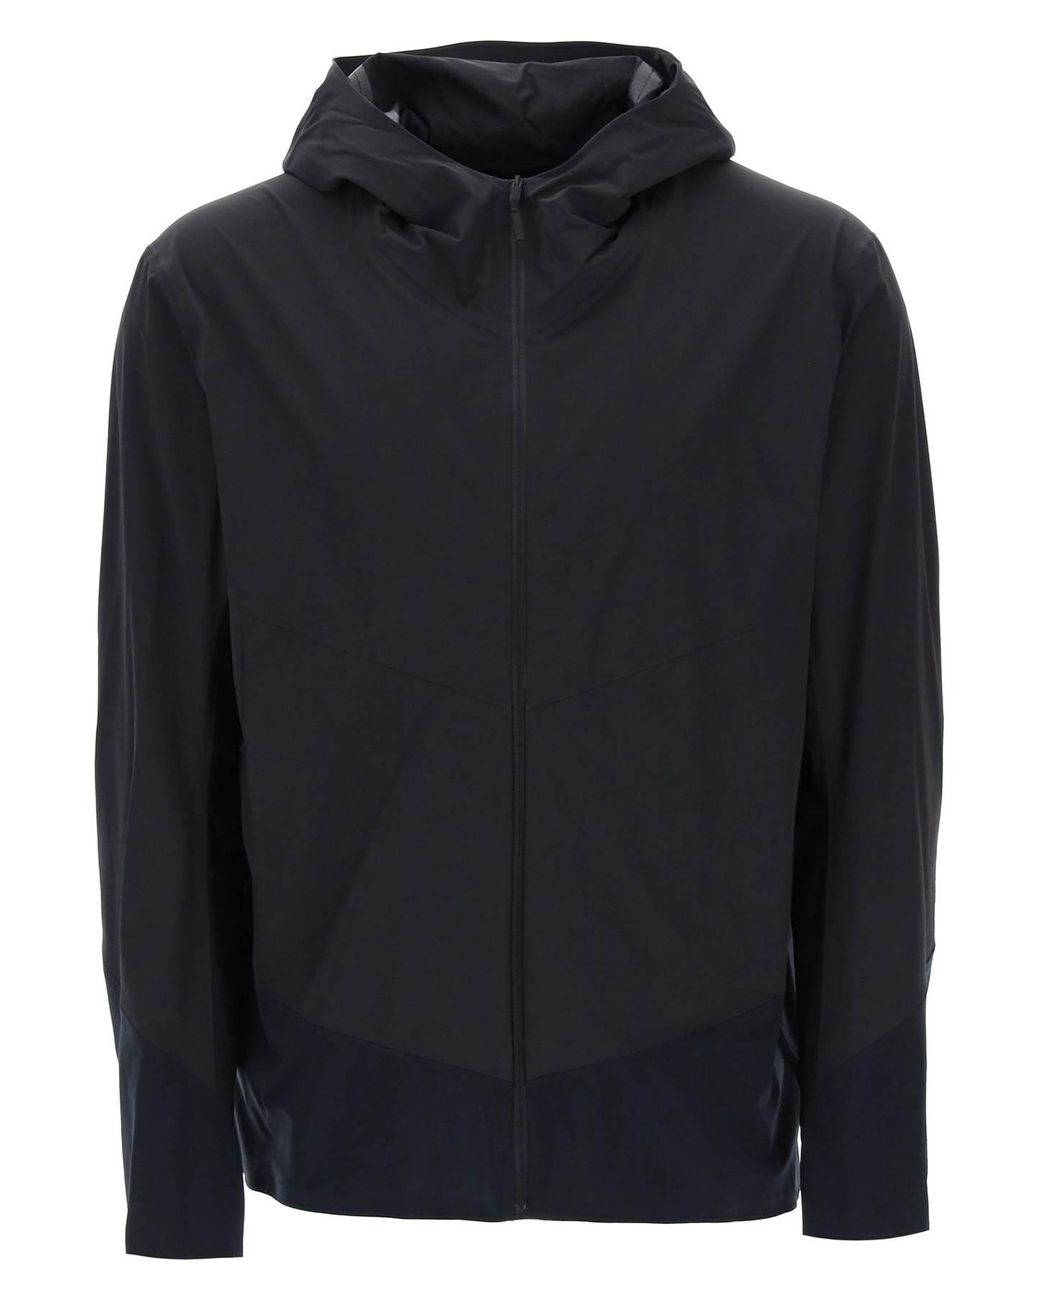 Veilance Secant Comp Hooded Softshell Jacket in Black for Men | Lyst